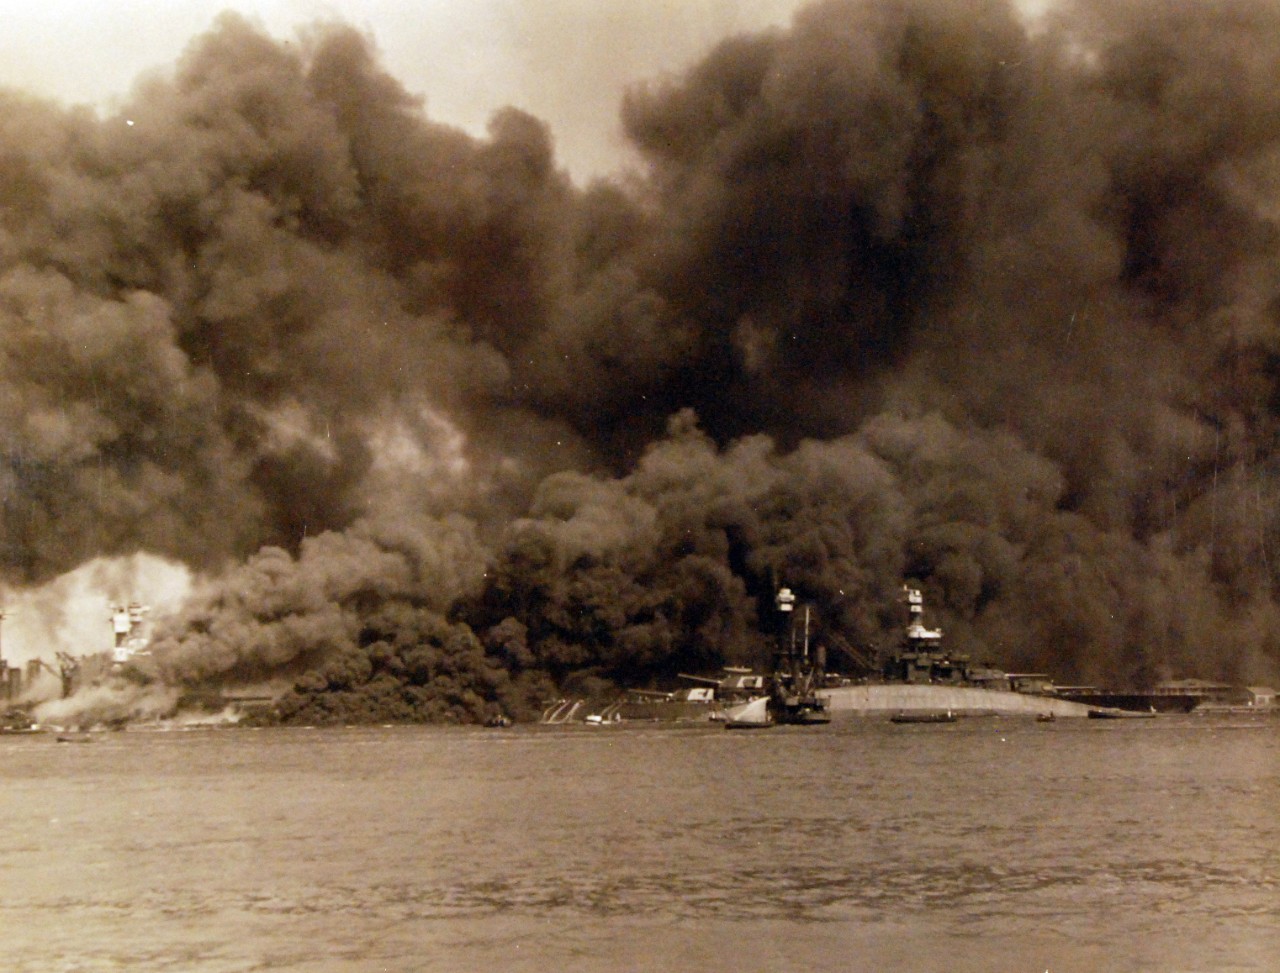 <p>80-G-32417: Japanese Attack on Pearl Harbor, December 7, 1941. View of “Battleship Row” during or immediately after the Japanese raid. The capsized USS Oklahoma (BB 37) is in the center, alongside USS Maryland (BB 46). Note, on the mount card, hand-writing reads, “Negative reversed in formatting.”&nbsp;</p>
